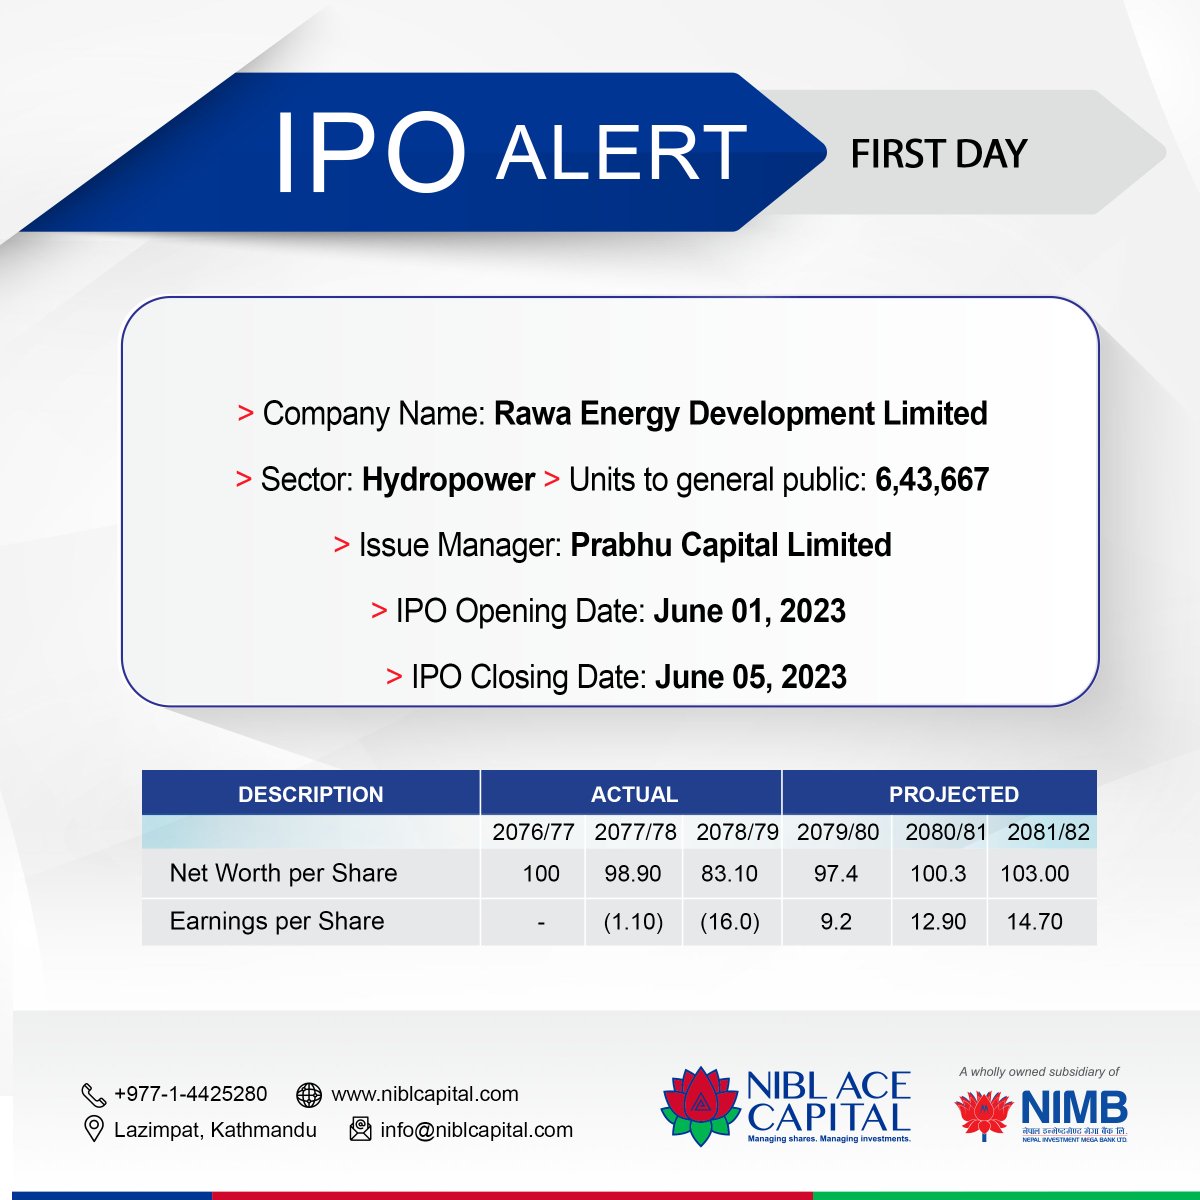 Rawa Energy Development Limited has issued 6,43,667 units of IPO to General Public from today (June 01, 2023 to June 05, 2023).

Do not miss the opportunity!!!

#IPOAlert

#rawaenergydevelopmentlimited

#donotmisstheopportunity

#NIBLAceCapital